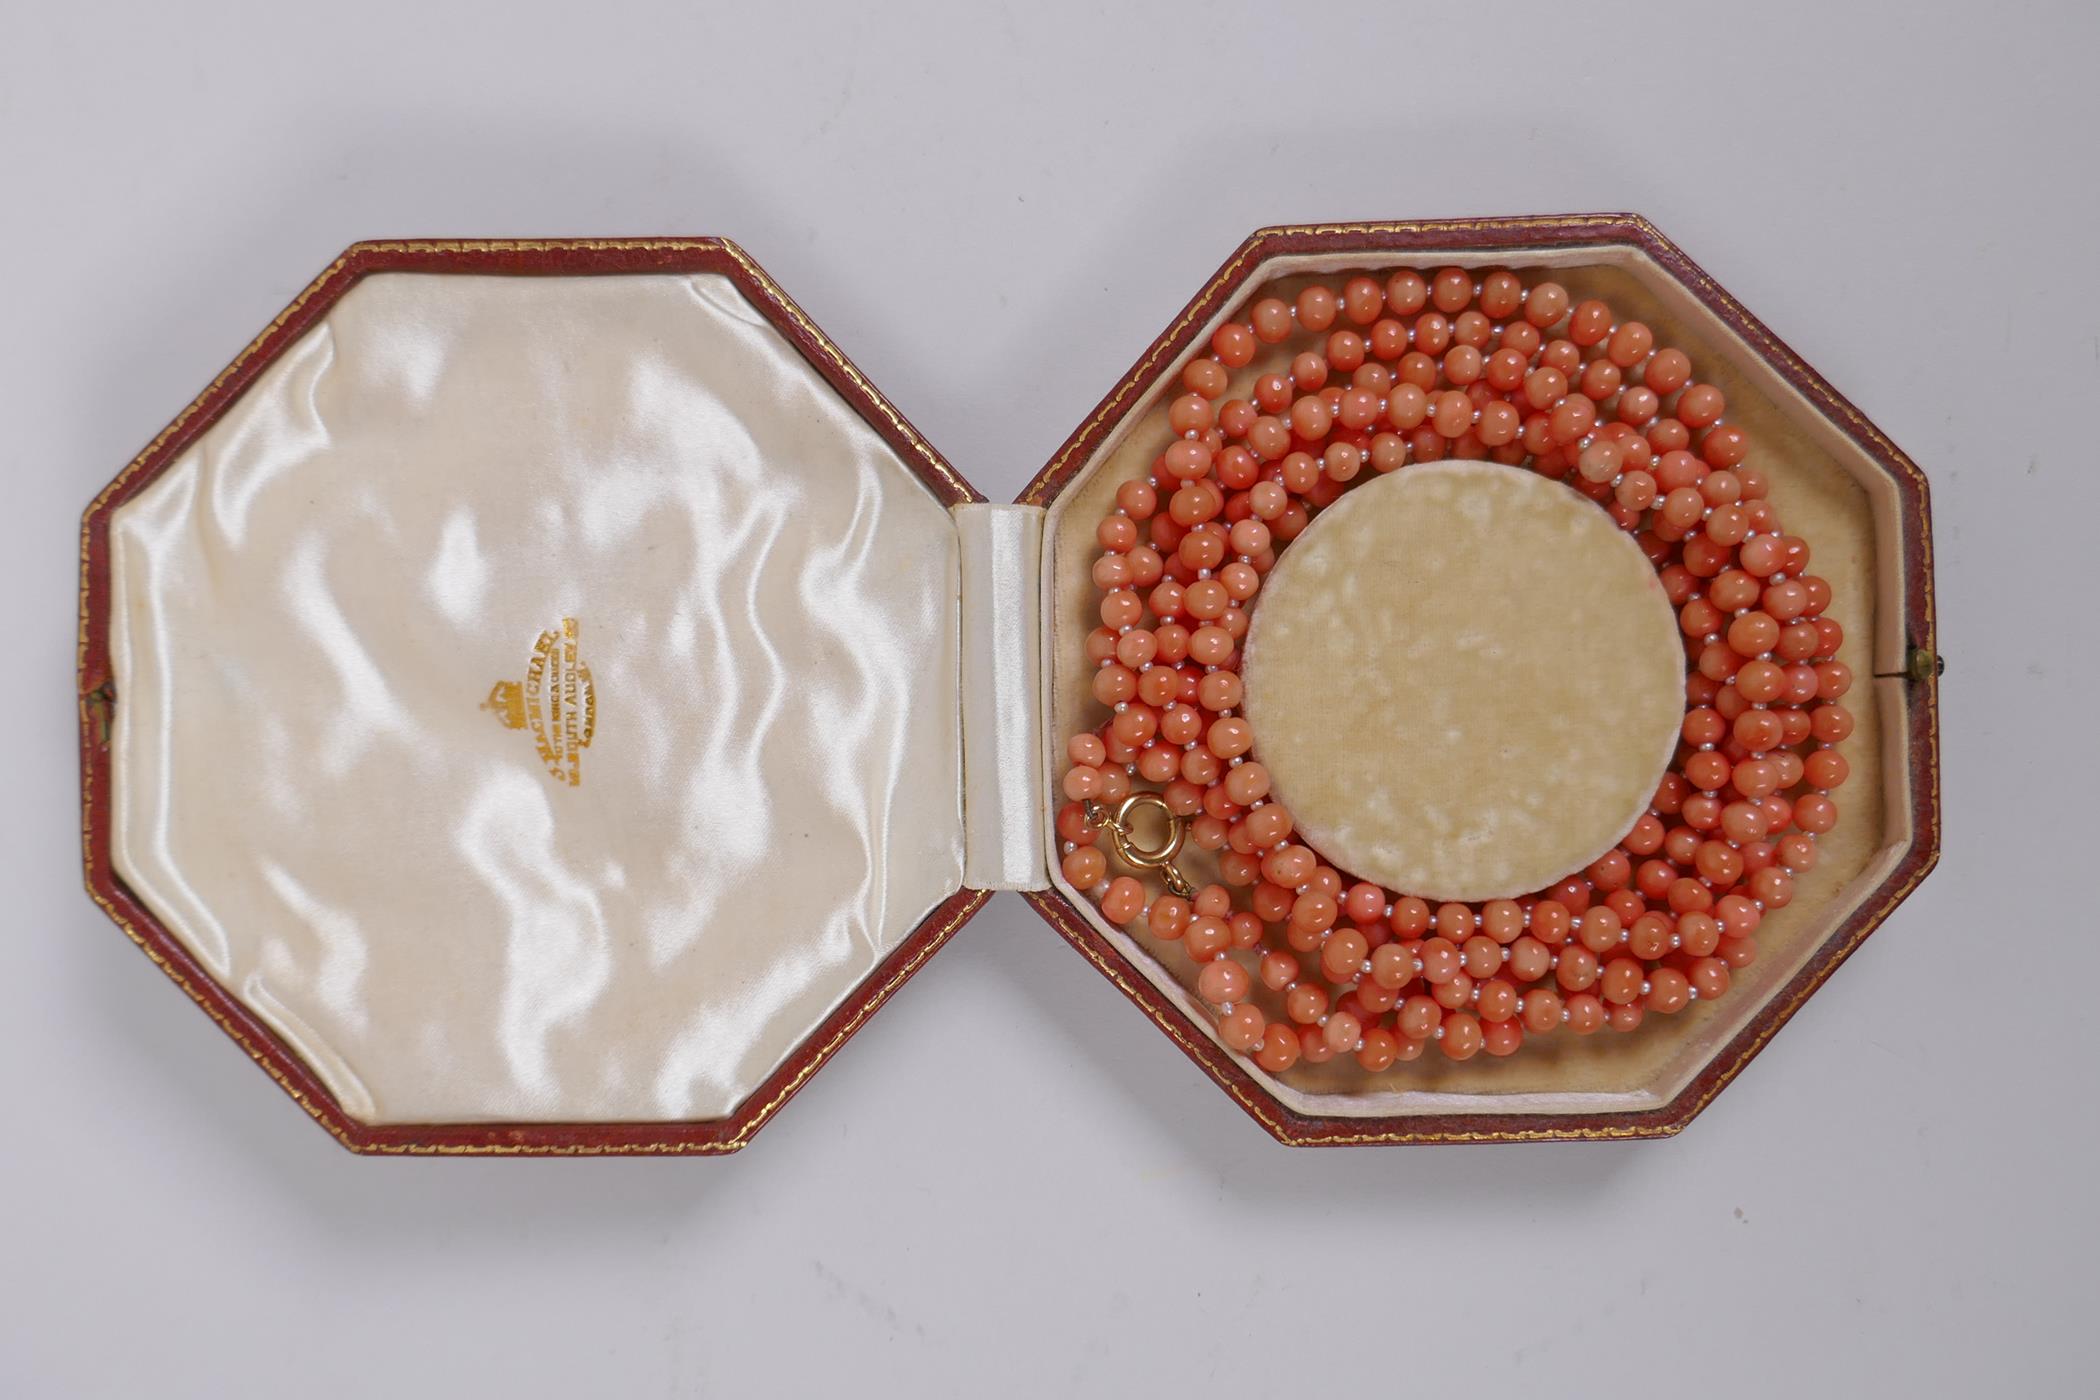 An antique coral and seed pearl beaded necklace with a yellow metal clasp, 148cm long - Image 6 of 6